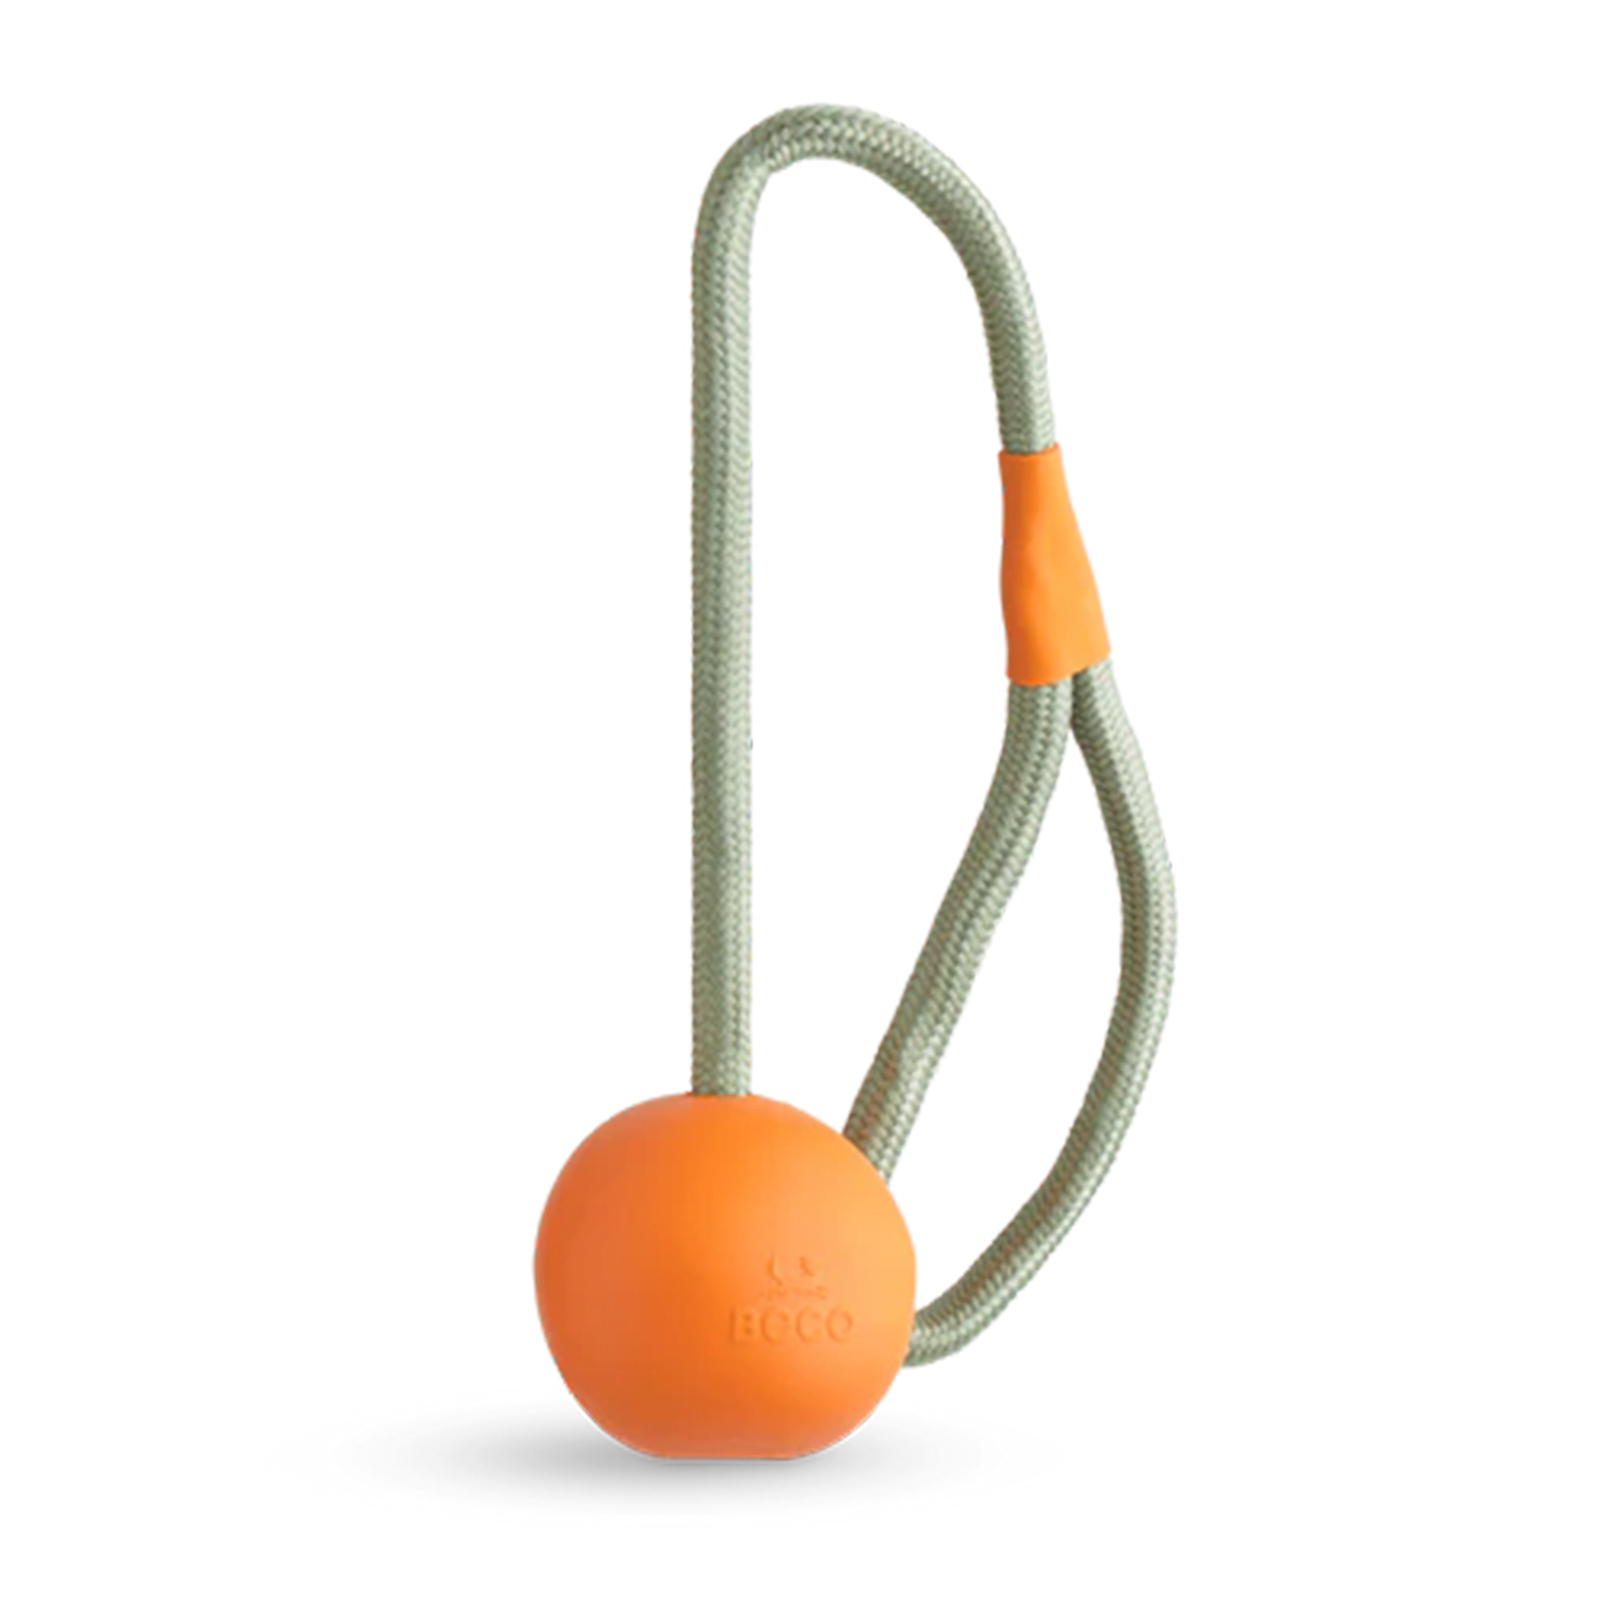 Beco Natural Rubber Slinger Ball With Rope Orange Fetch Toy For